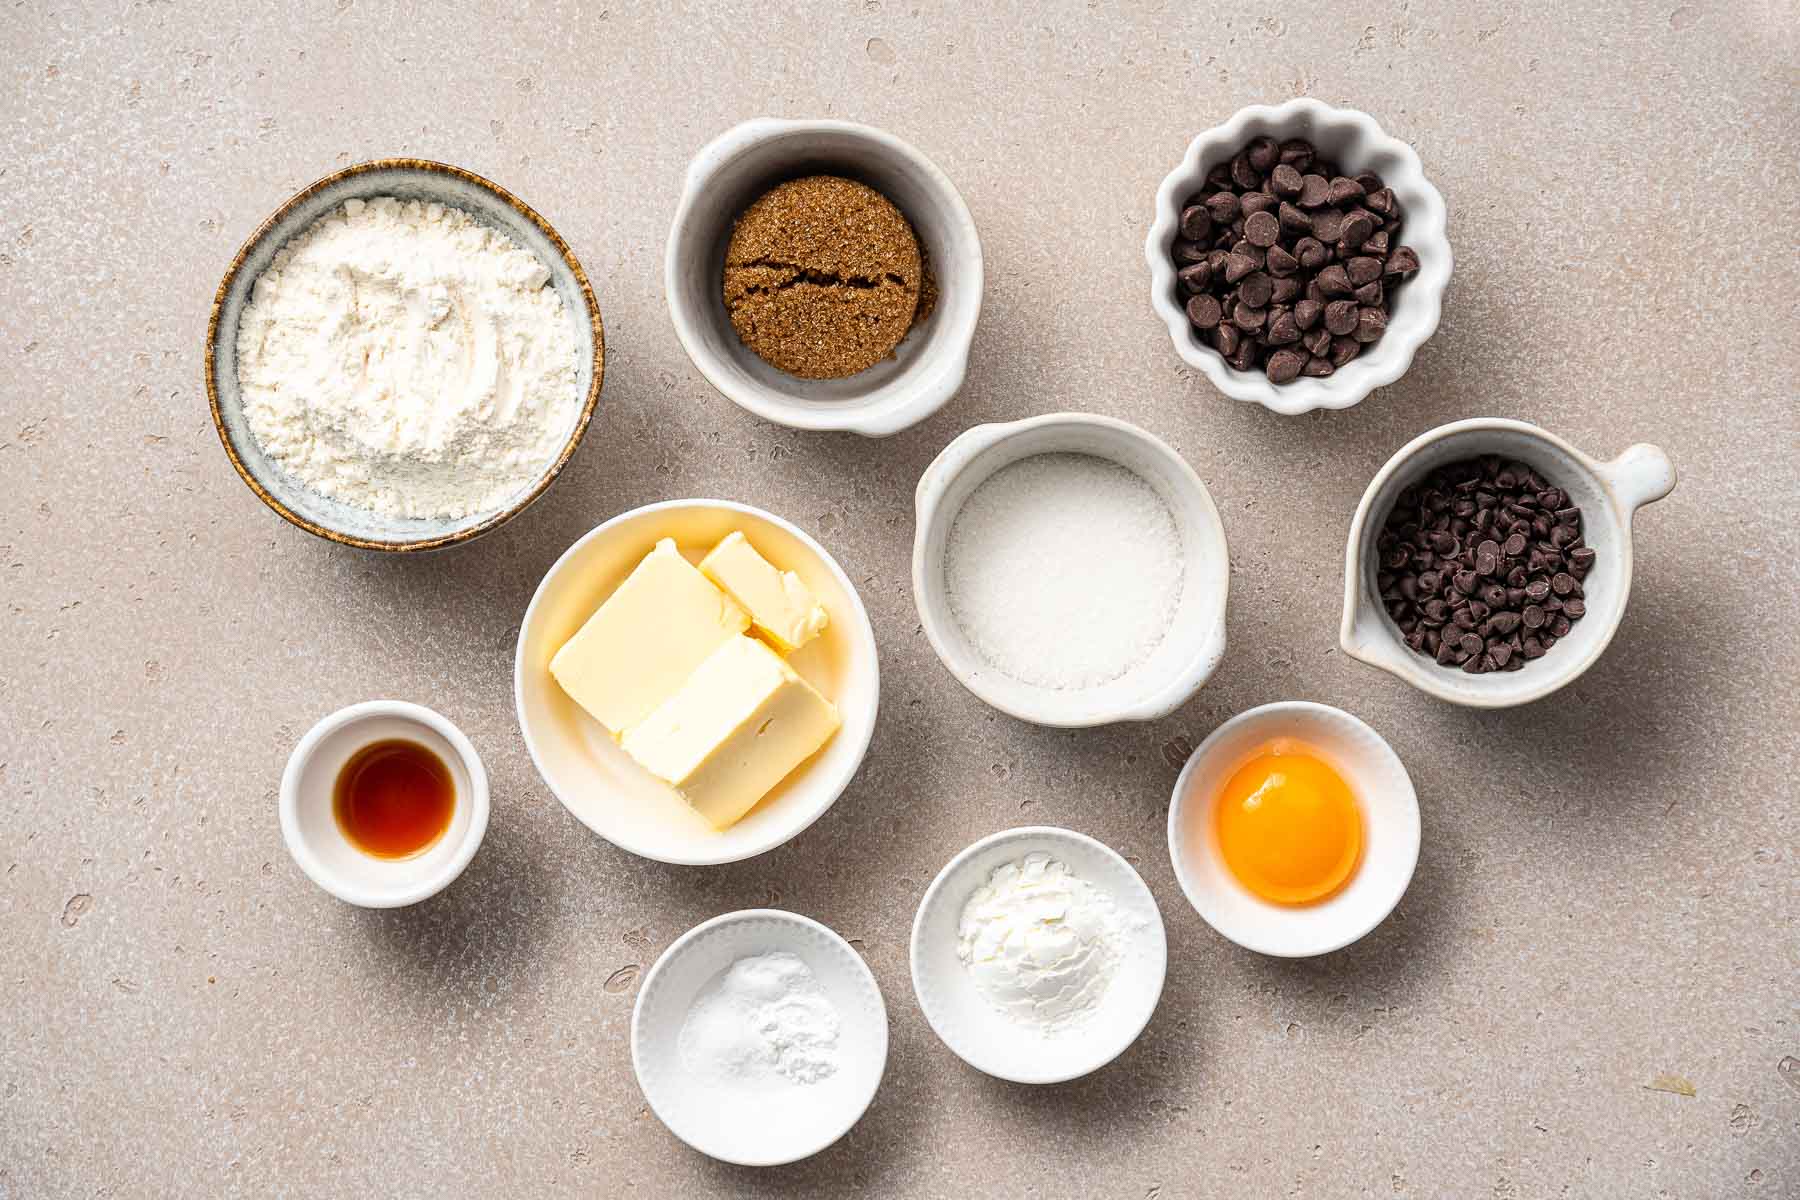 Baking ingredients in small bowls on white surface.